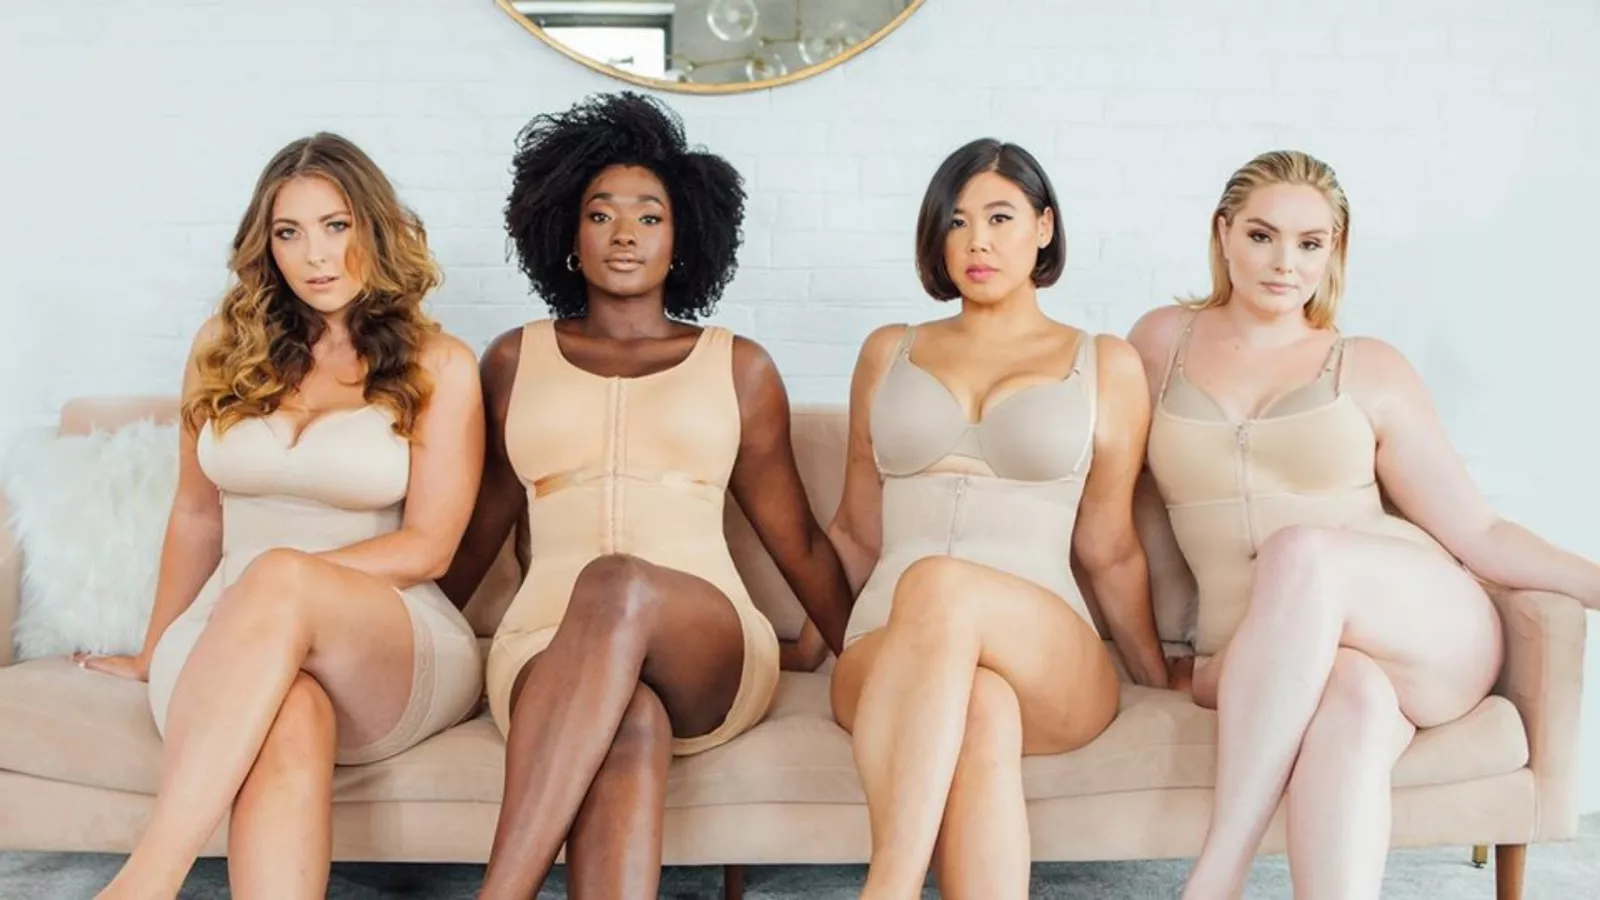 These Bodysuits May Help Flatten Your Tummy and Give You a Butt